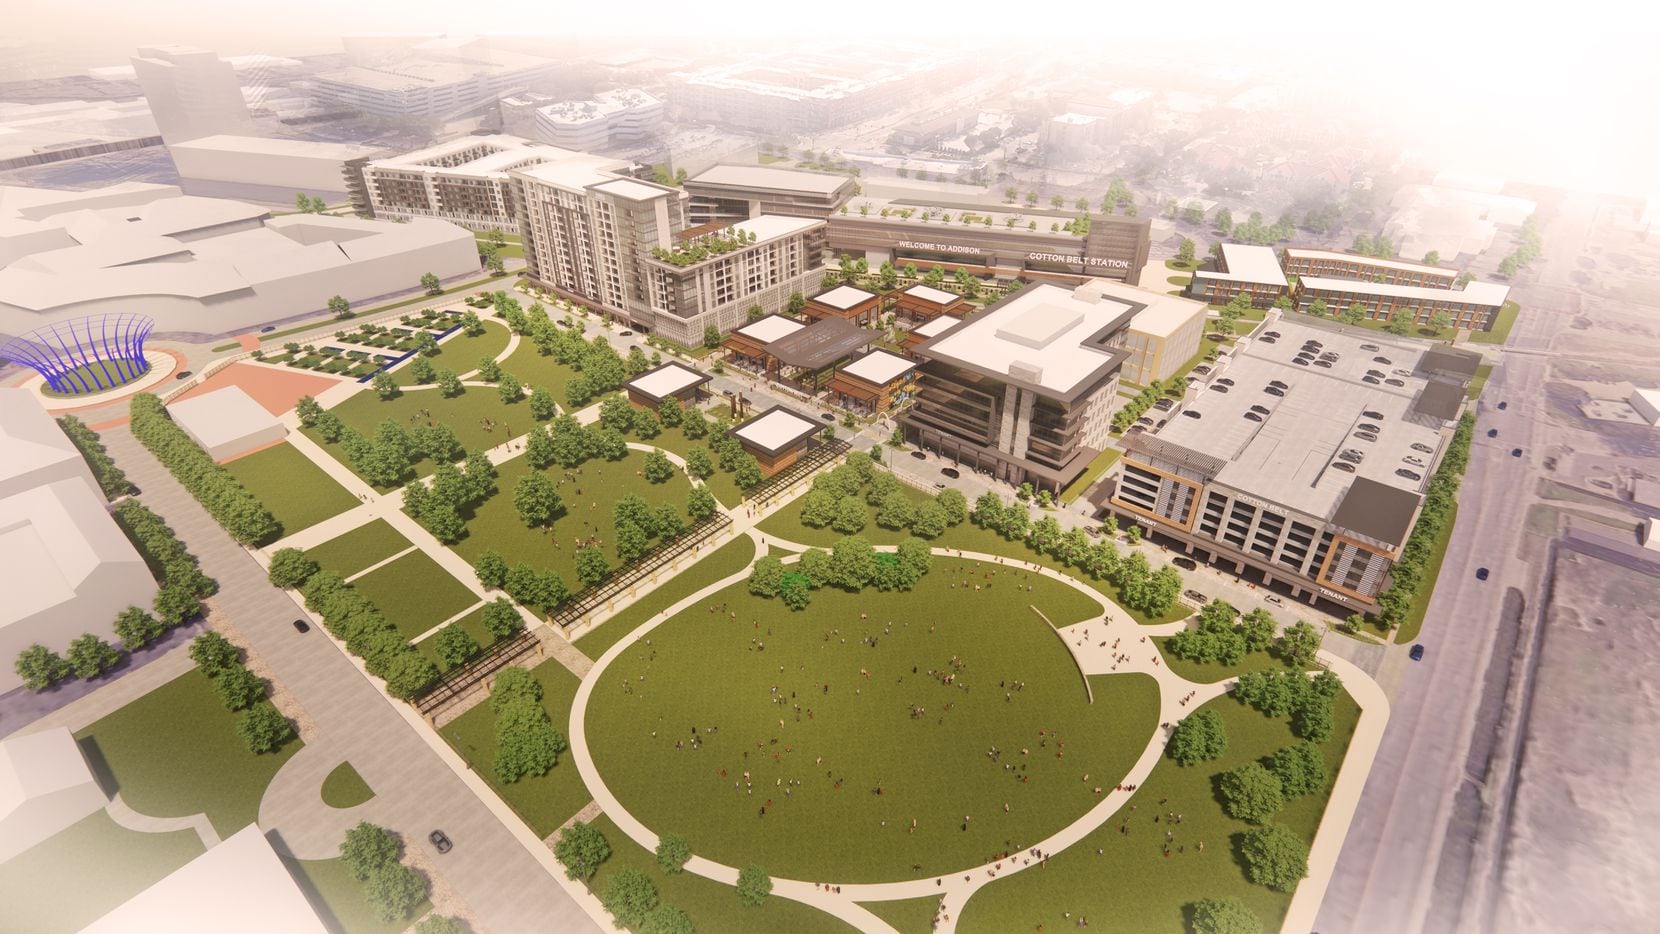 The new buildings will overlook a 10-acre park.